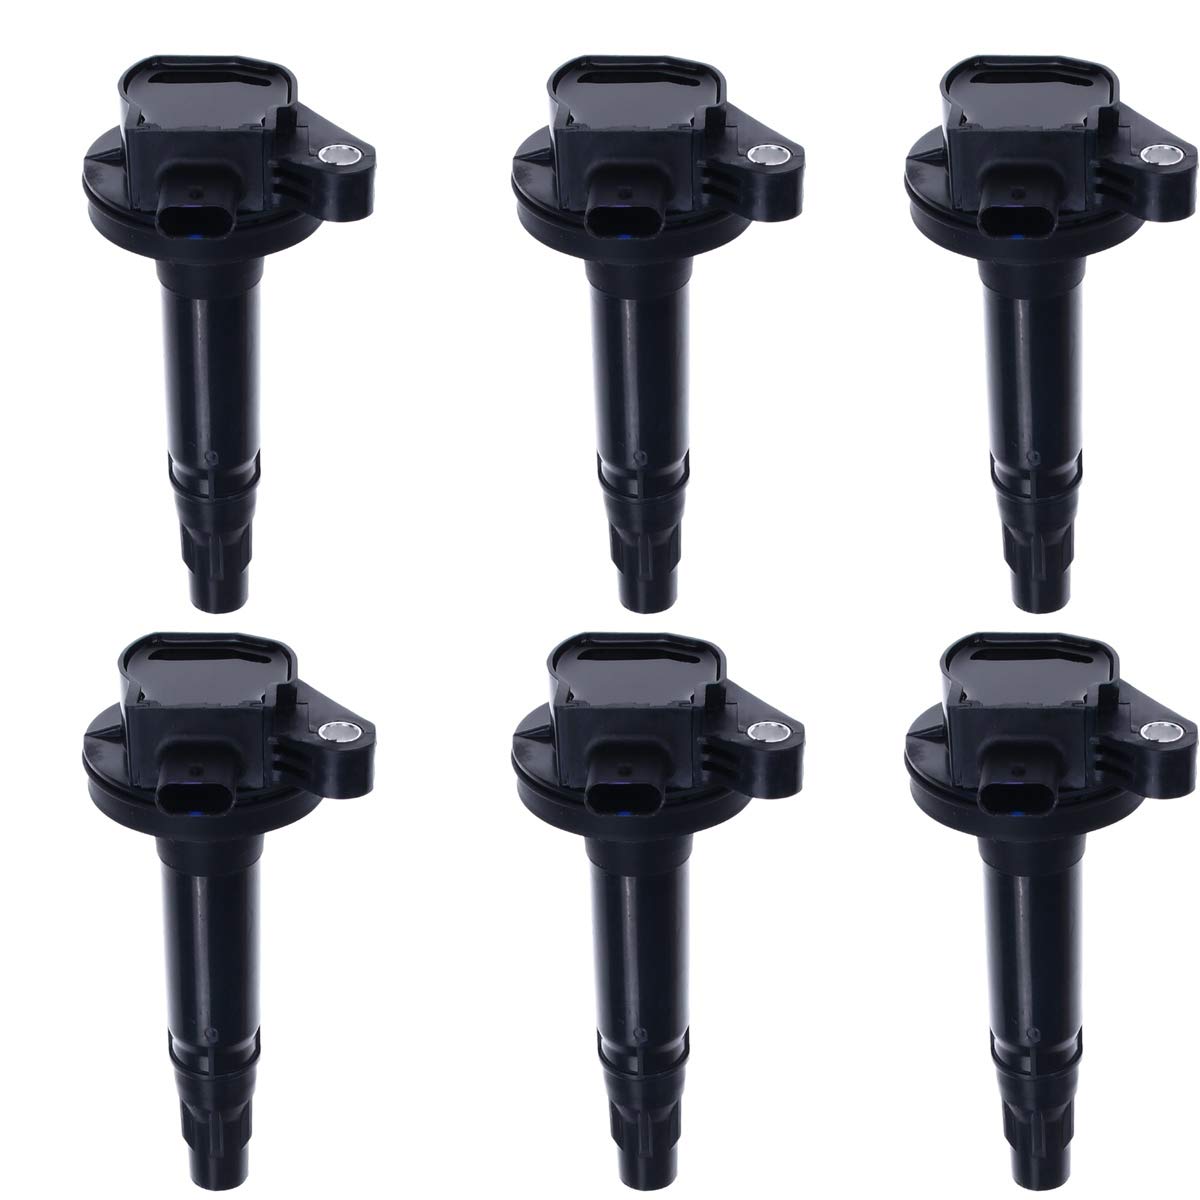 A-Premium Ignition Coil Pack Set of 6 Compatible with Edge 2016-2018 Explorer 2017-2019 F-150 Mustang 2016-2017 Lincoln Continental 2017-2020 MKT M...